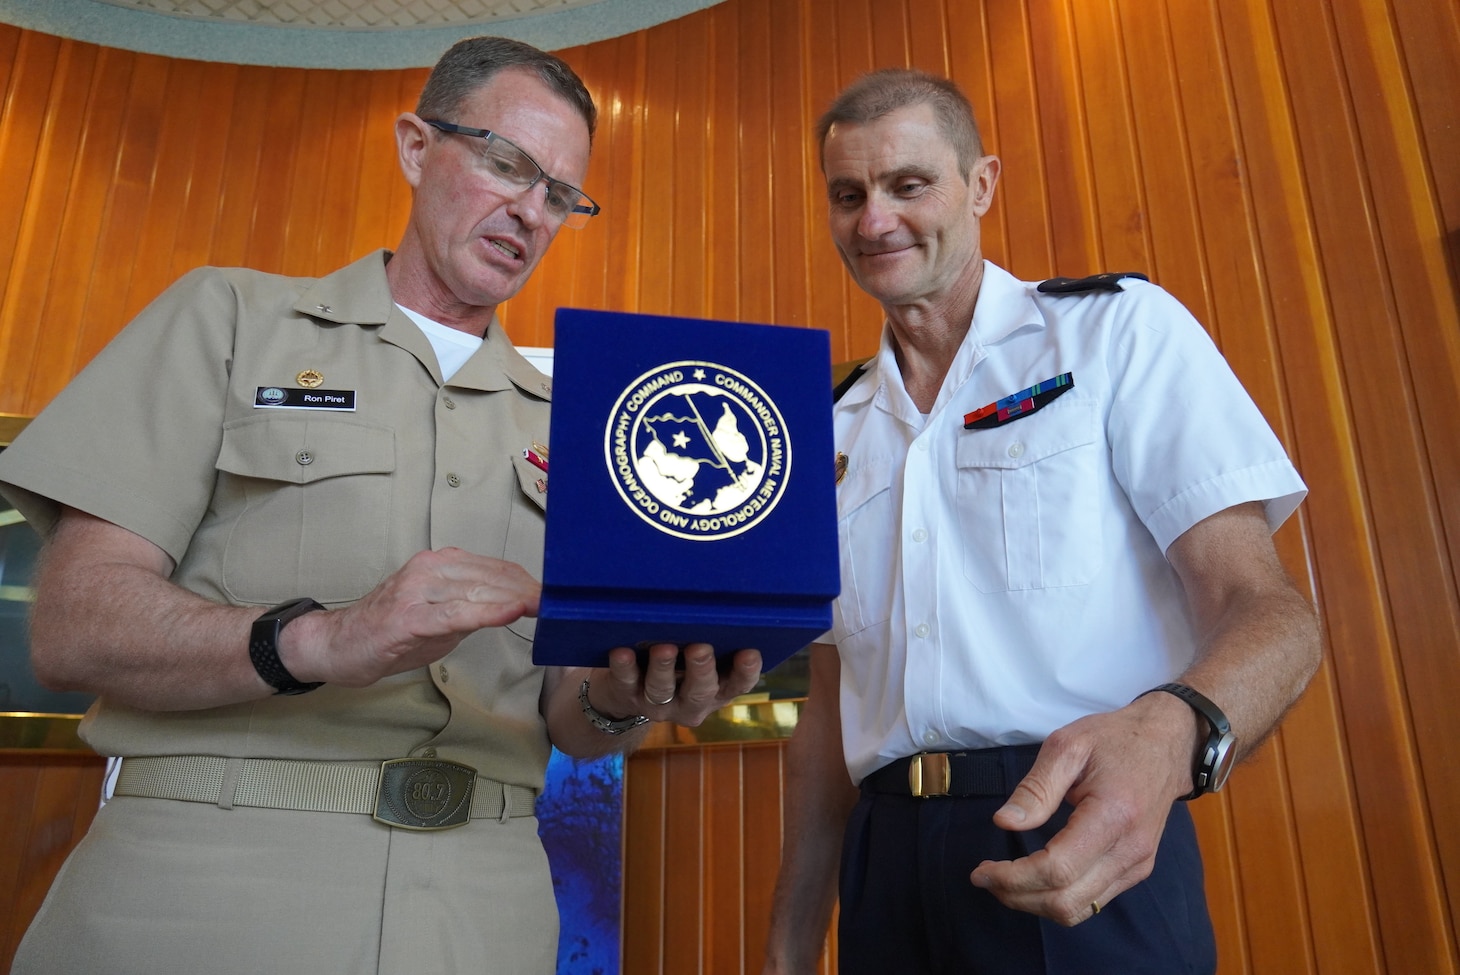 Brest, France —— Rear Adm. Ron Piret, Commander, Naval Meteorology and Oceanography Command, and staff members visited the Naval Hydrographic and Oceanographic Service (SHOM) in France, June 27, 2022. 



US and French officials came together to discuss ways both organizations can cooperate further in the European theater and globally in hydrography and oceanography.